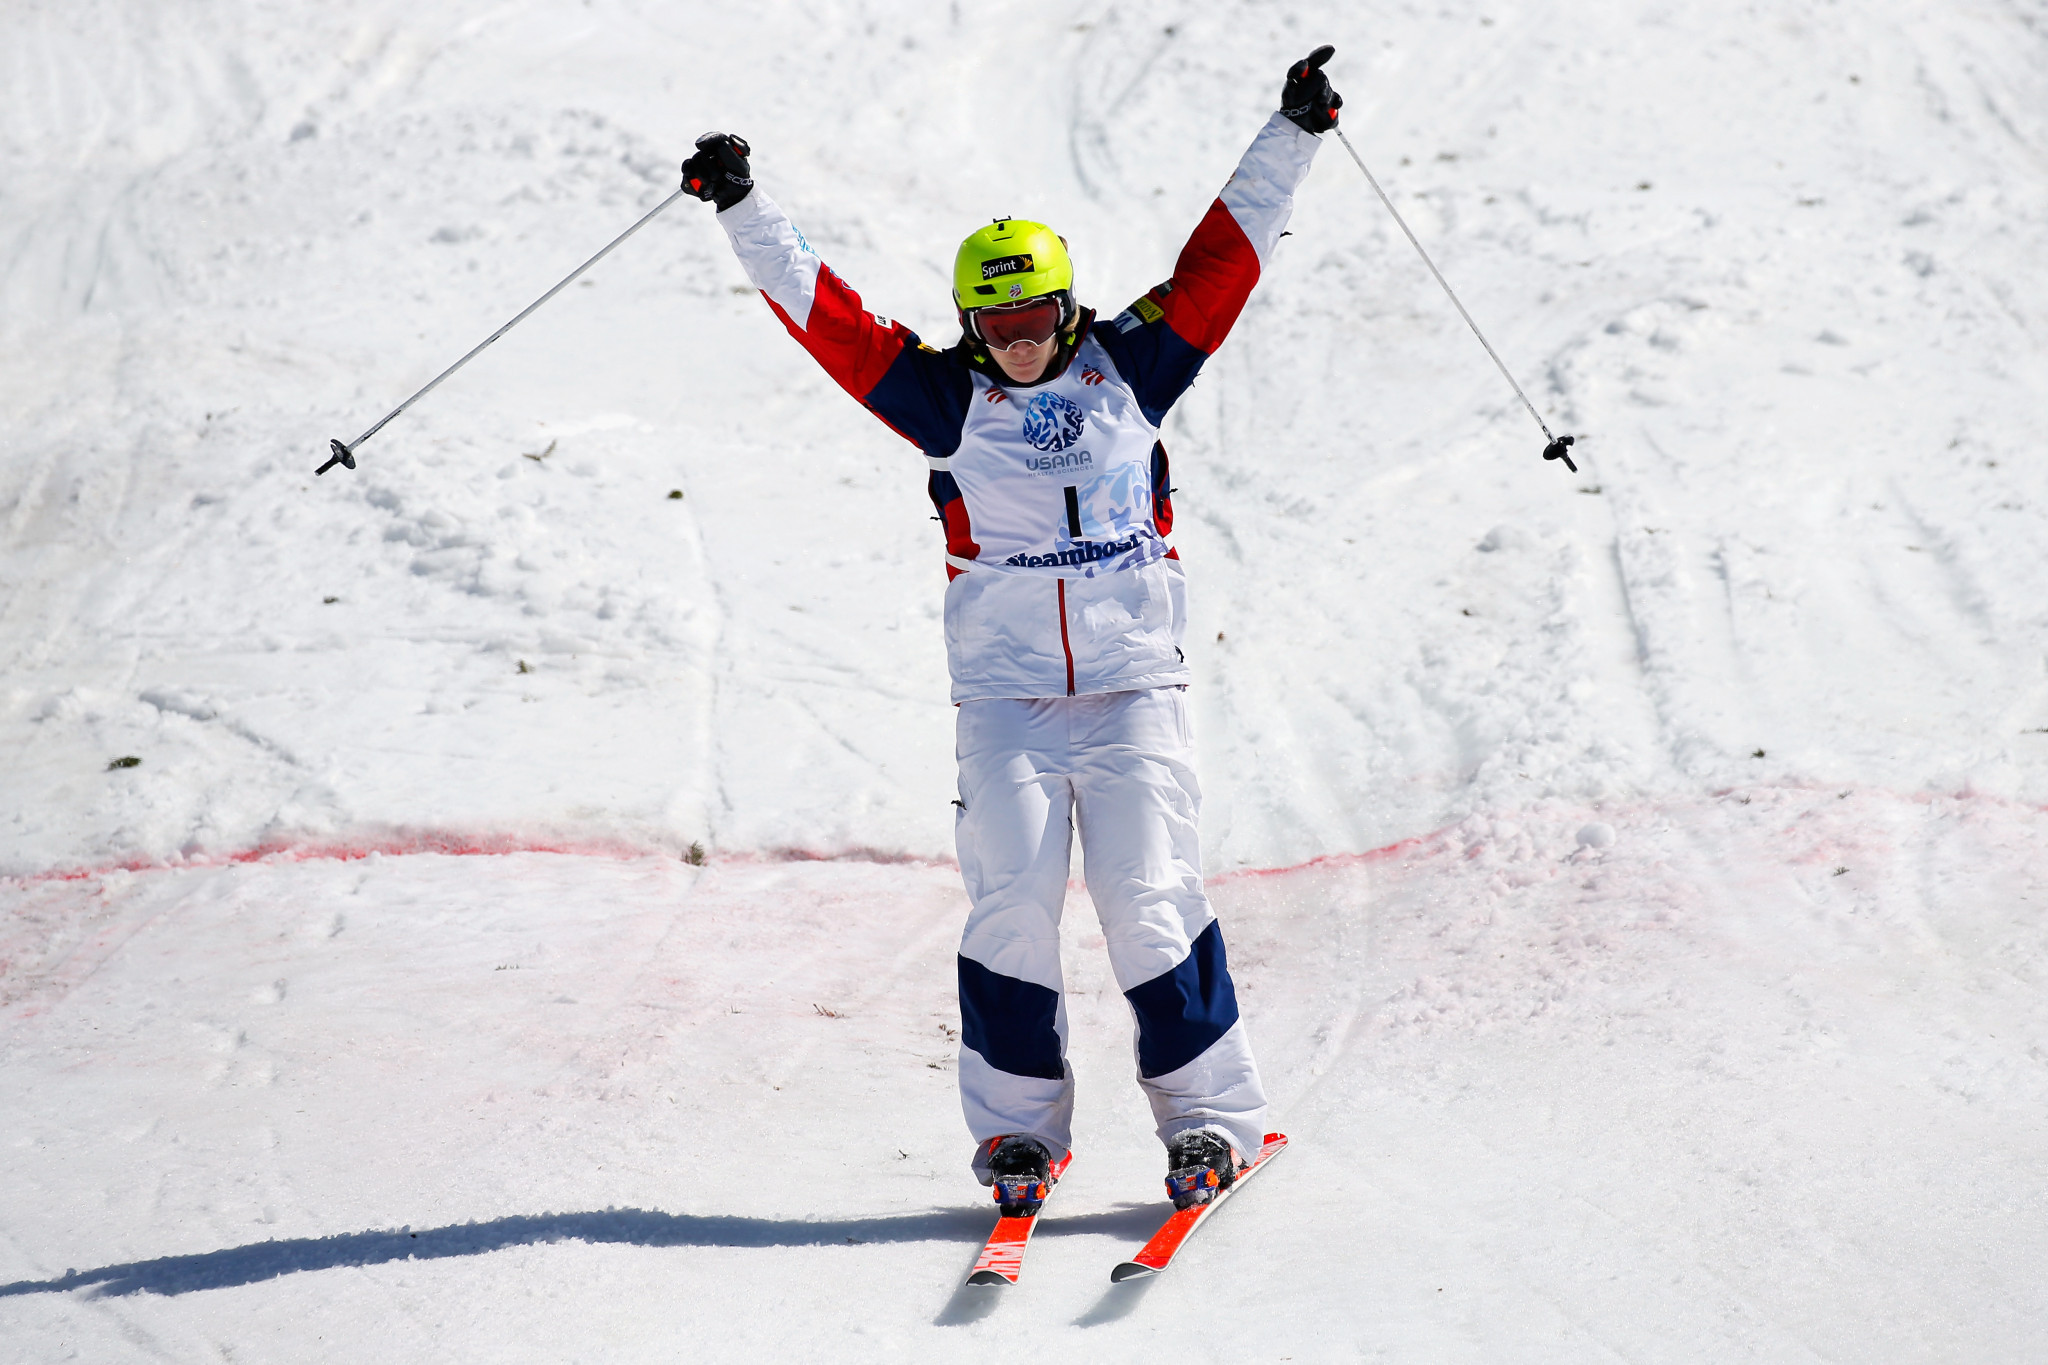 FIS announces newly-elected Athletes' Commission after voting at World Championships